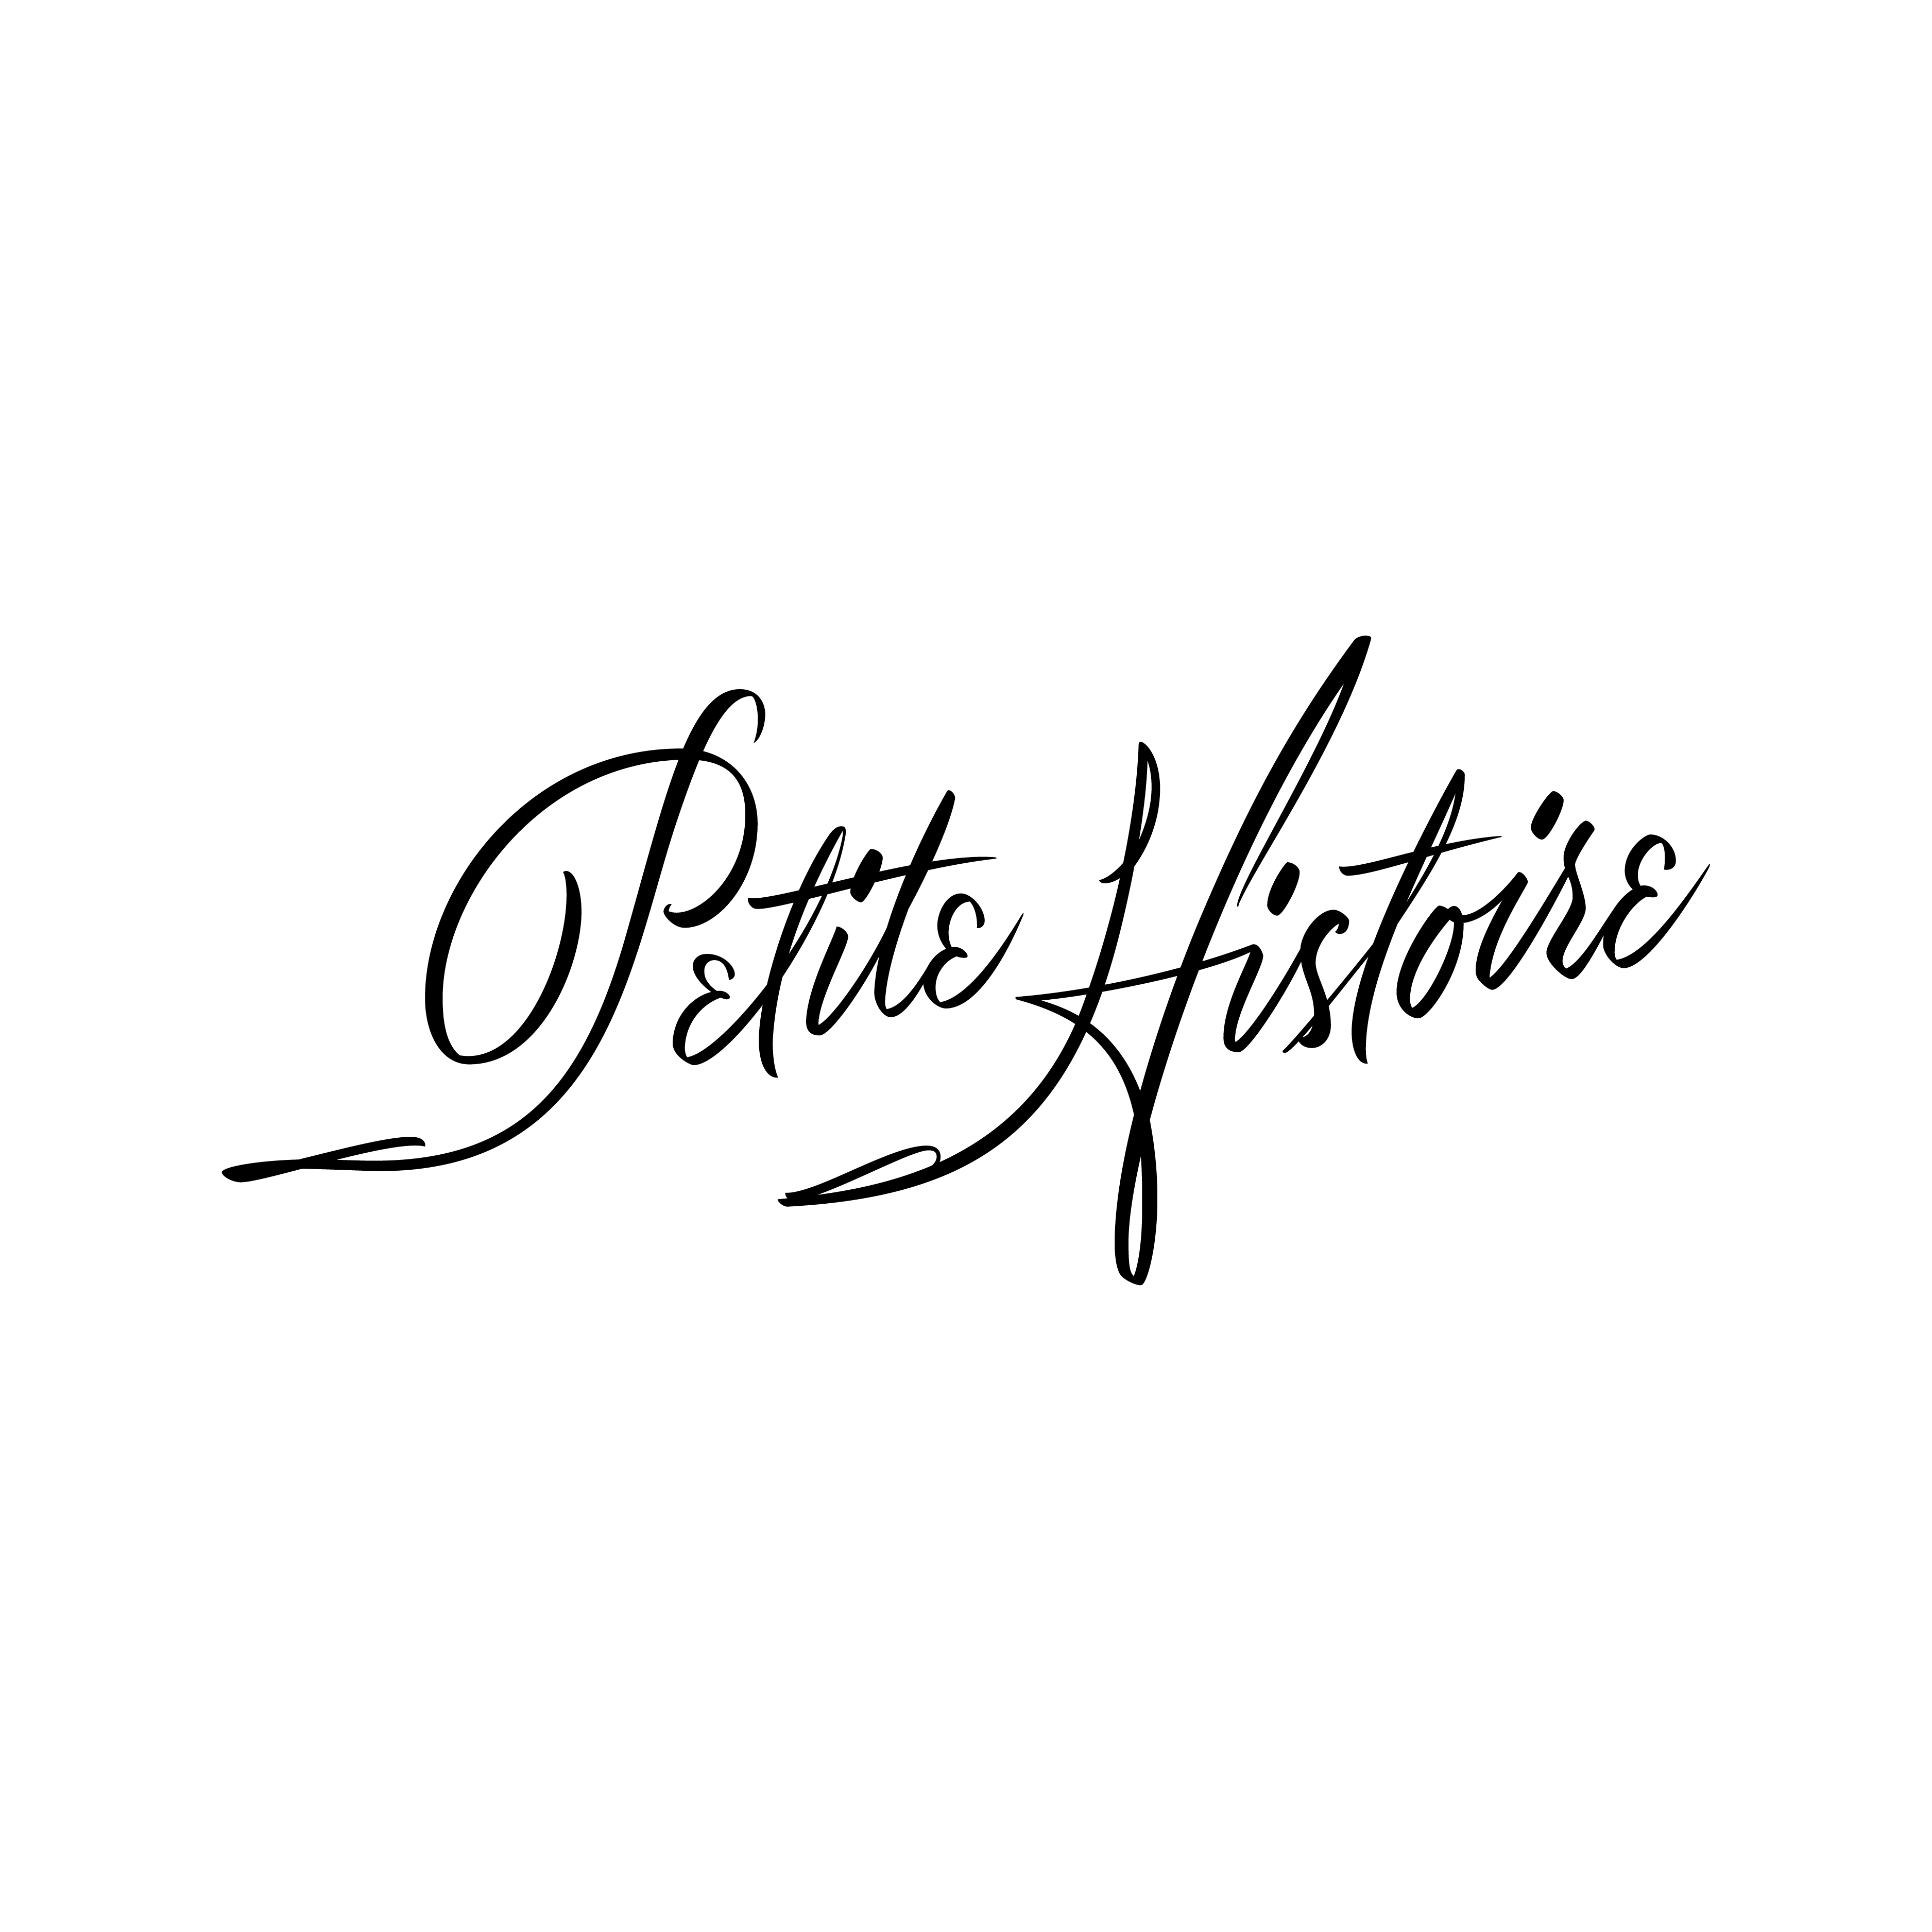 Petite Histoire logo design by logo designer Instinctual Beings for your inspiration and for the worlds largest logo competition